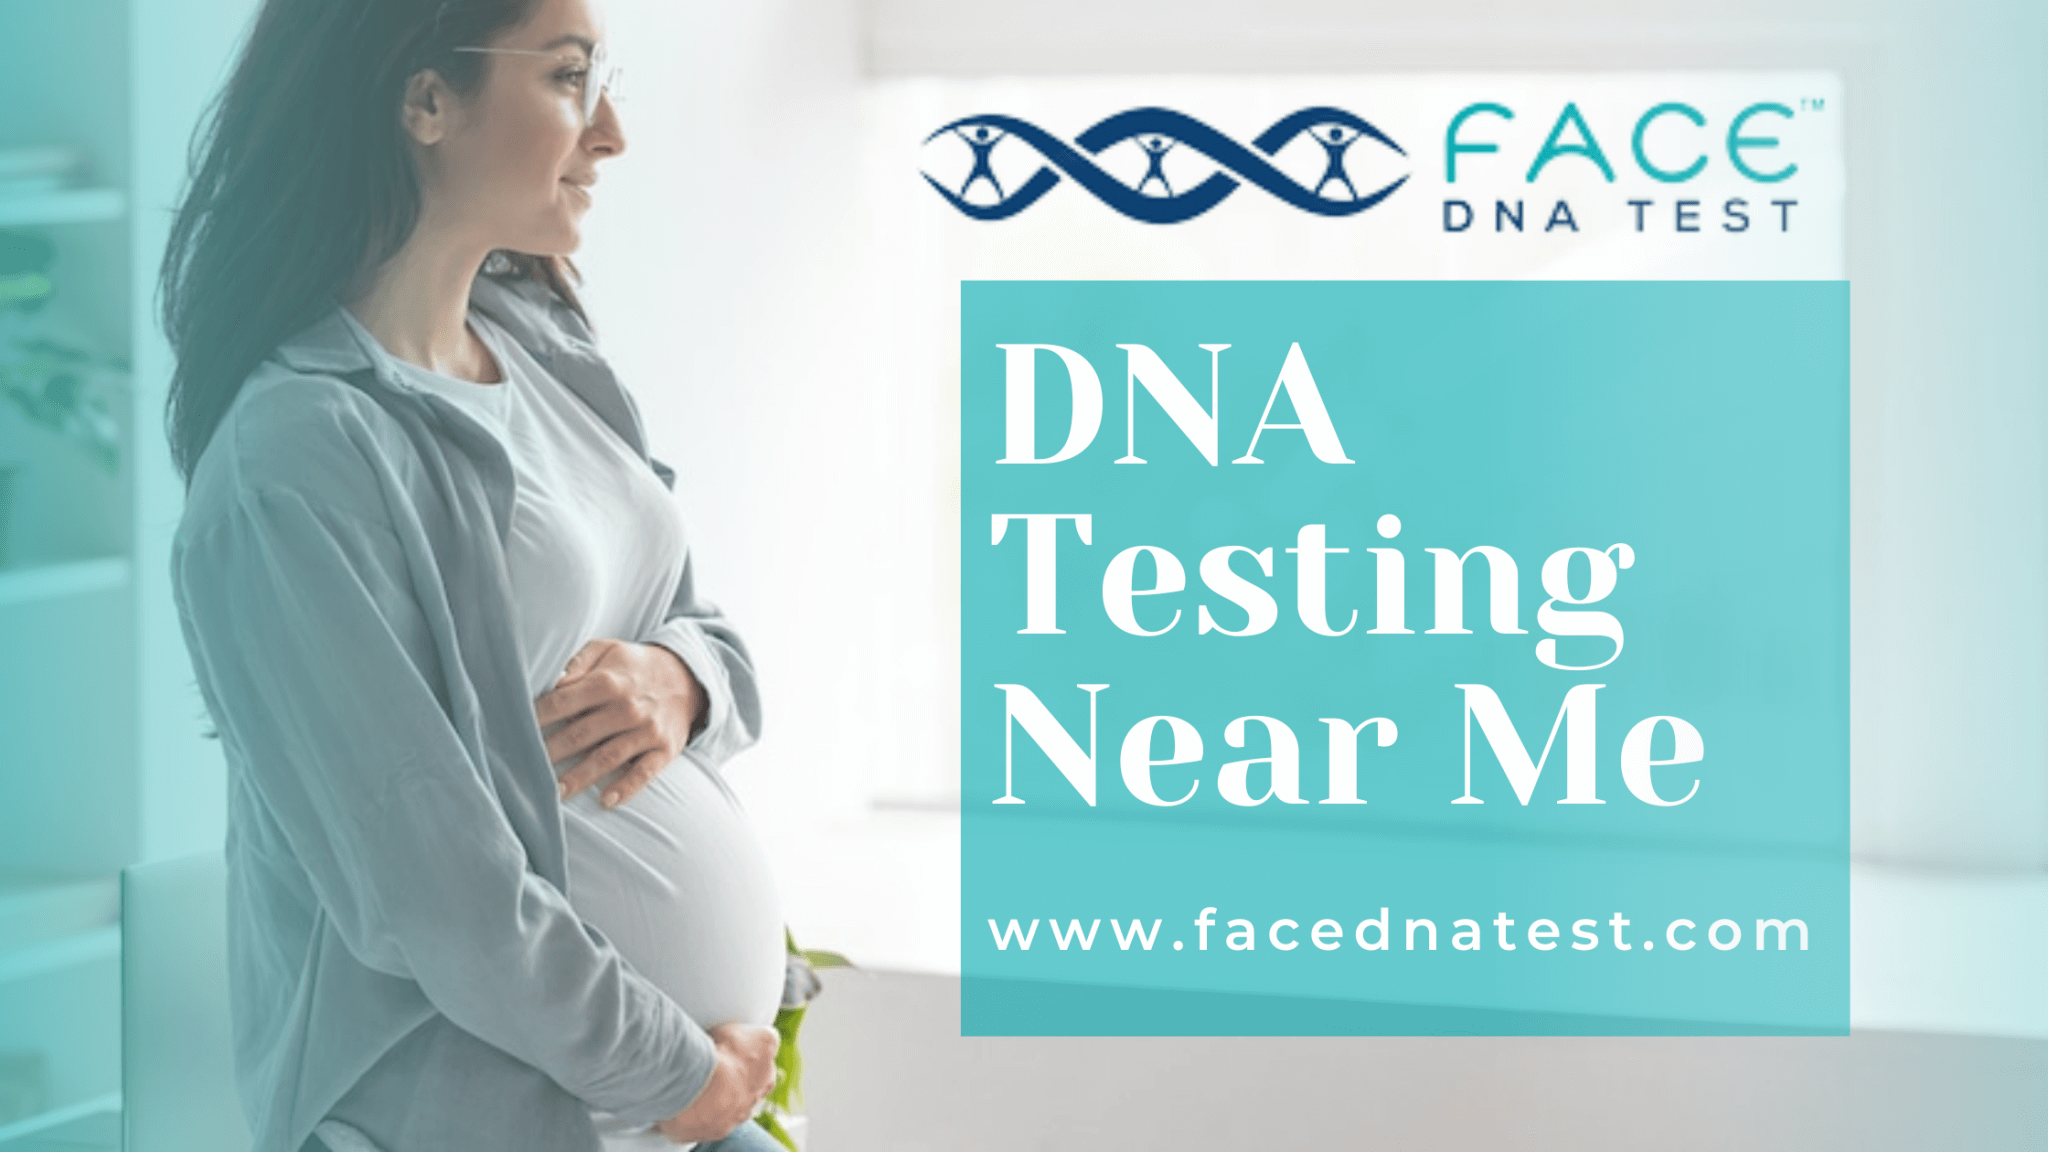 DNA Testing Near Me Face DNA Test